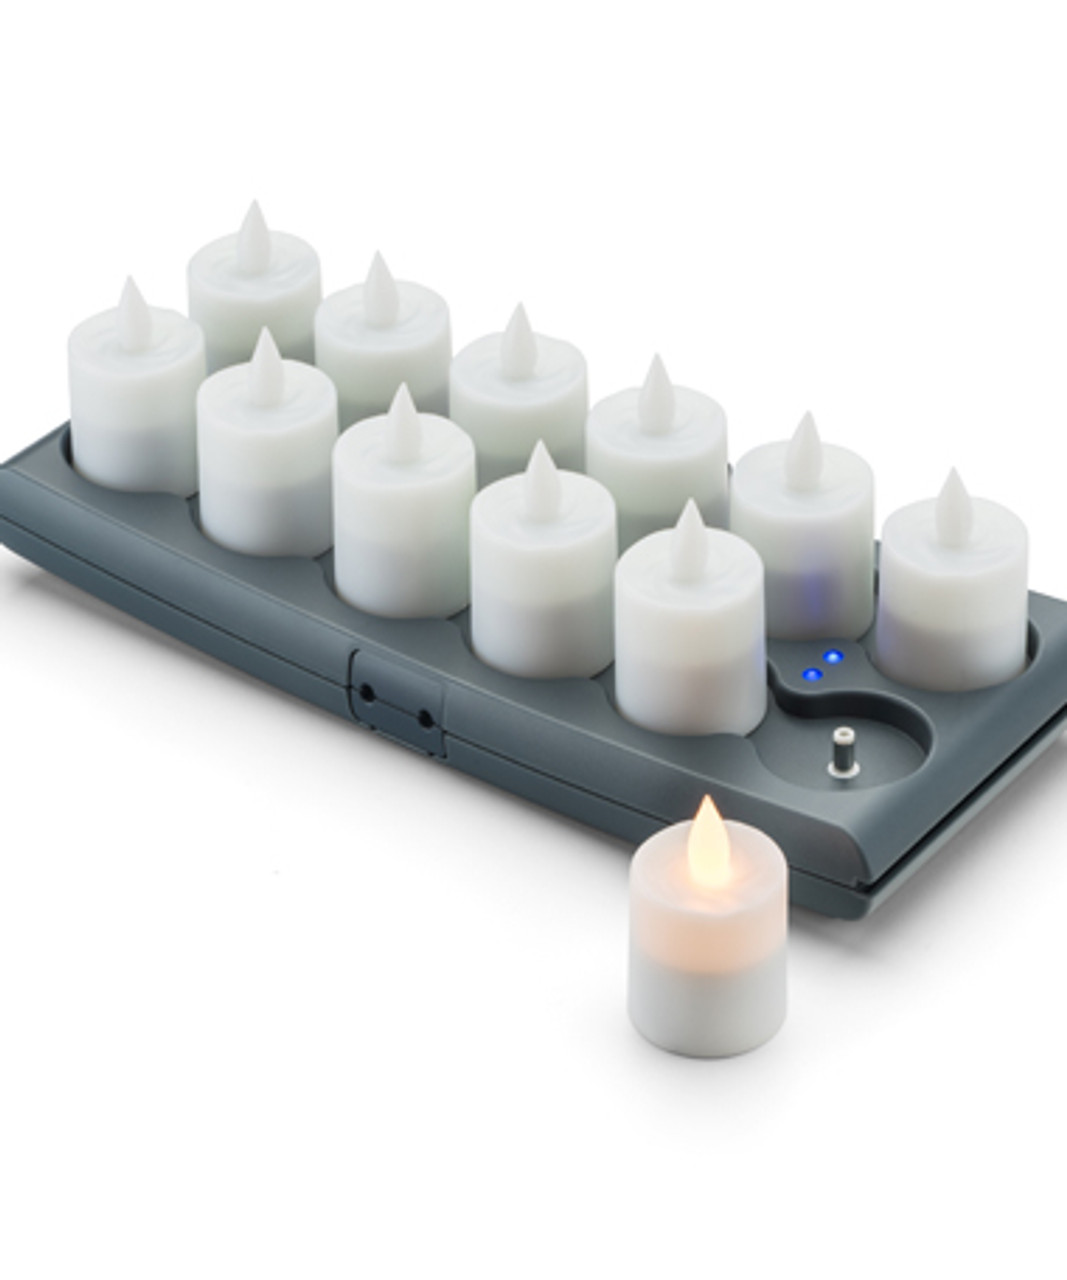 Value System Flameless Set: (12) Amber LED Candles, (1) Charging Tray, (1) USB Power Supply - D'light Online Inc